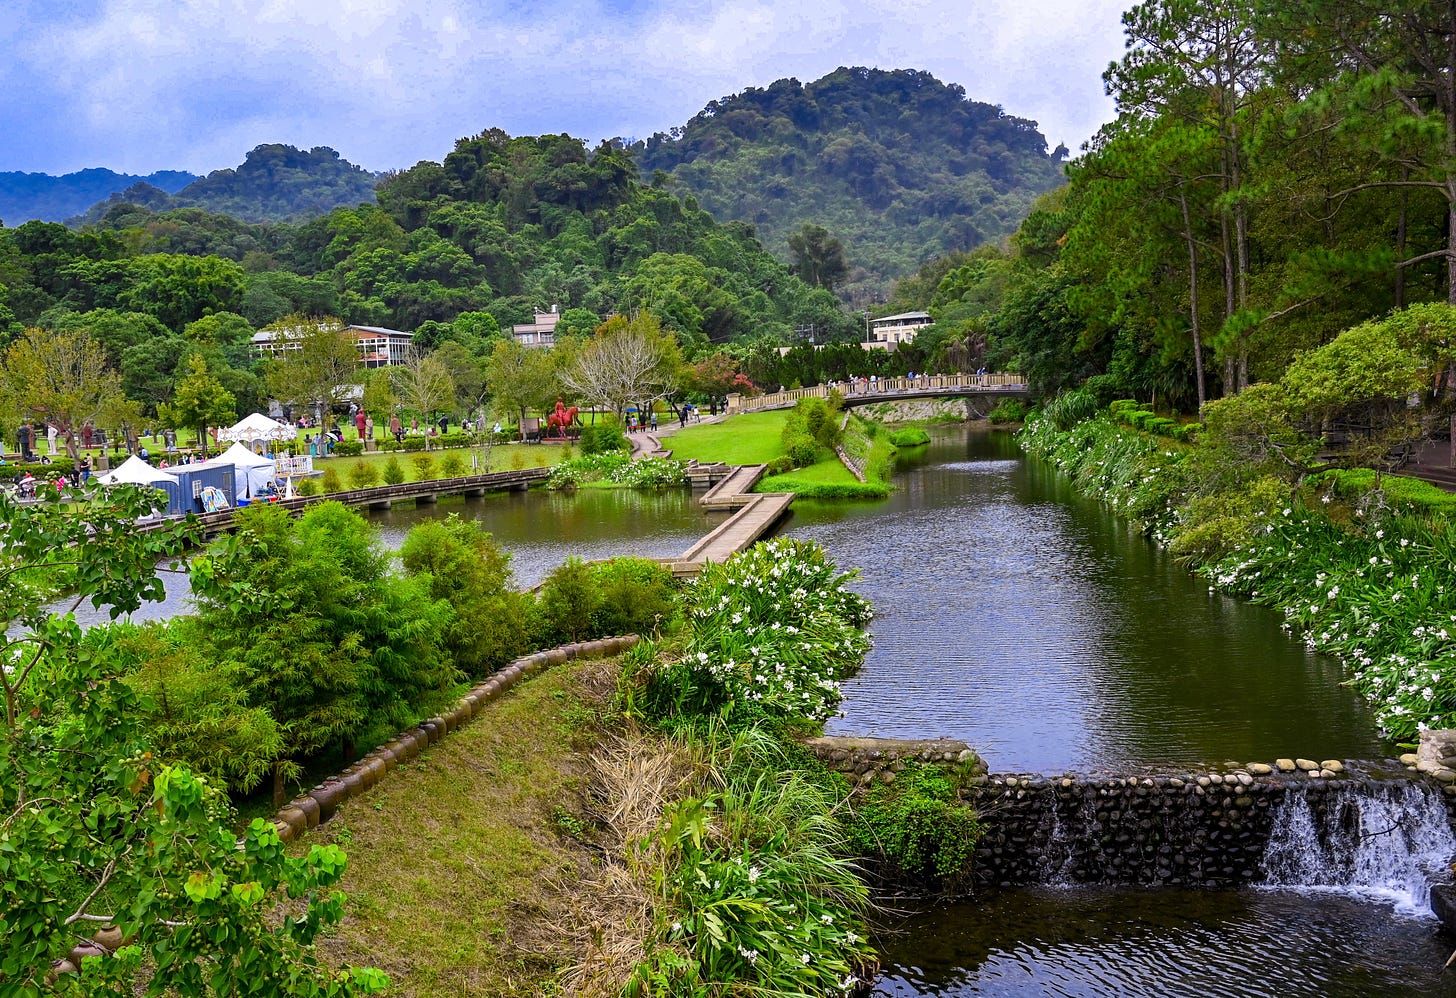 Cihu Park sits alongside a canal in a lush green valley on the outskirts of Taoyuan